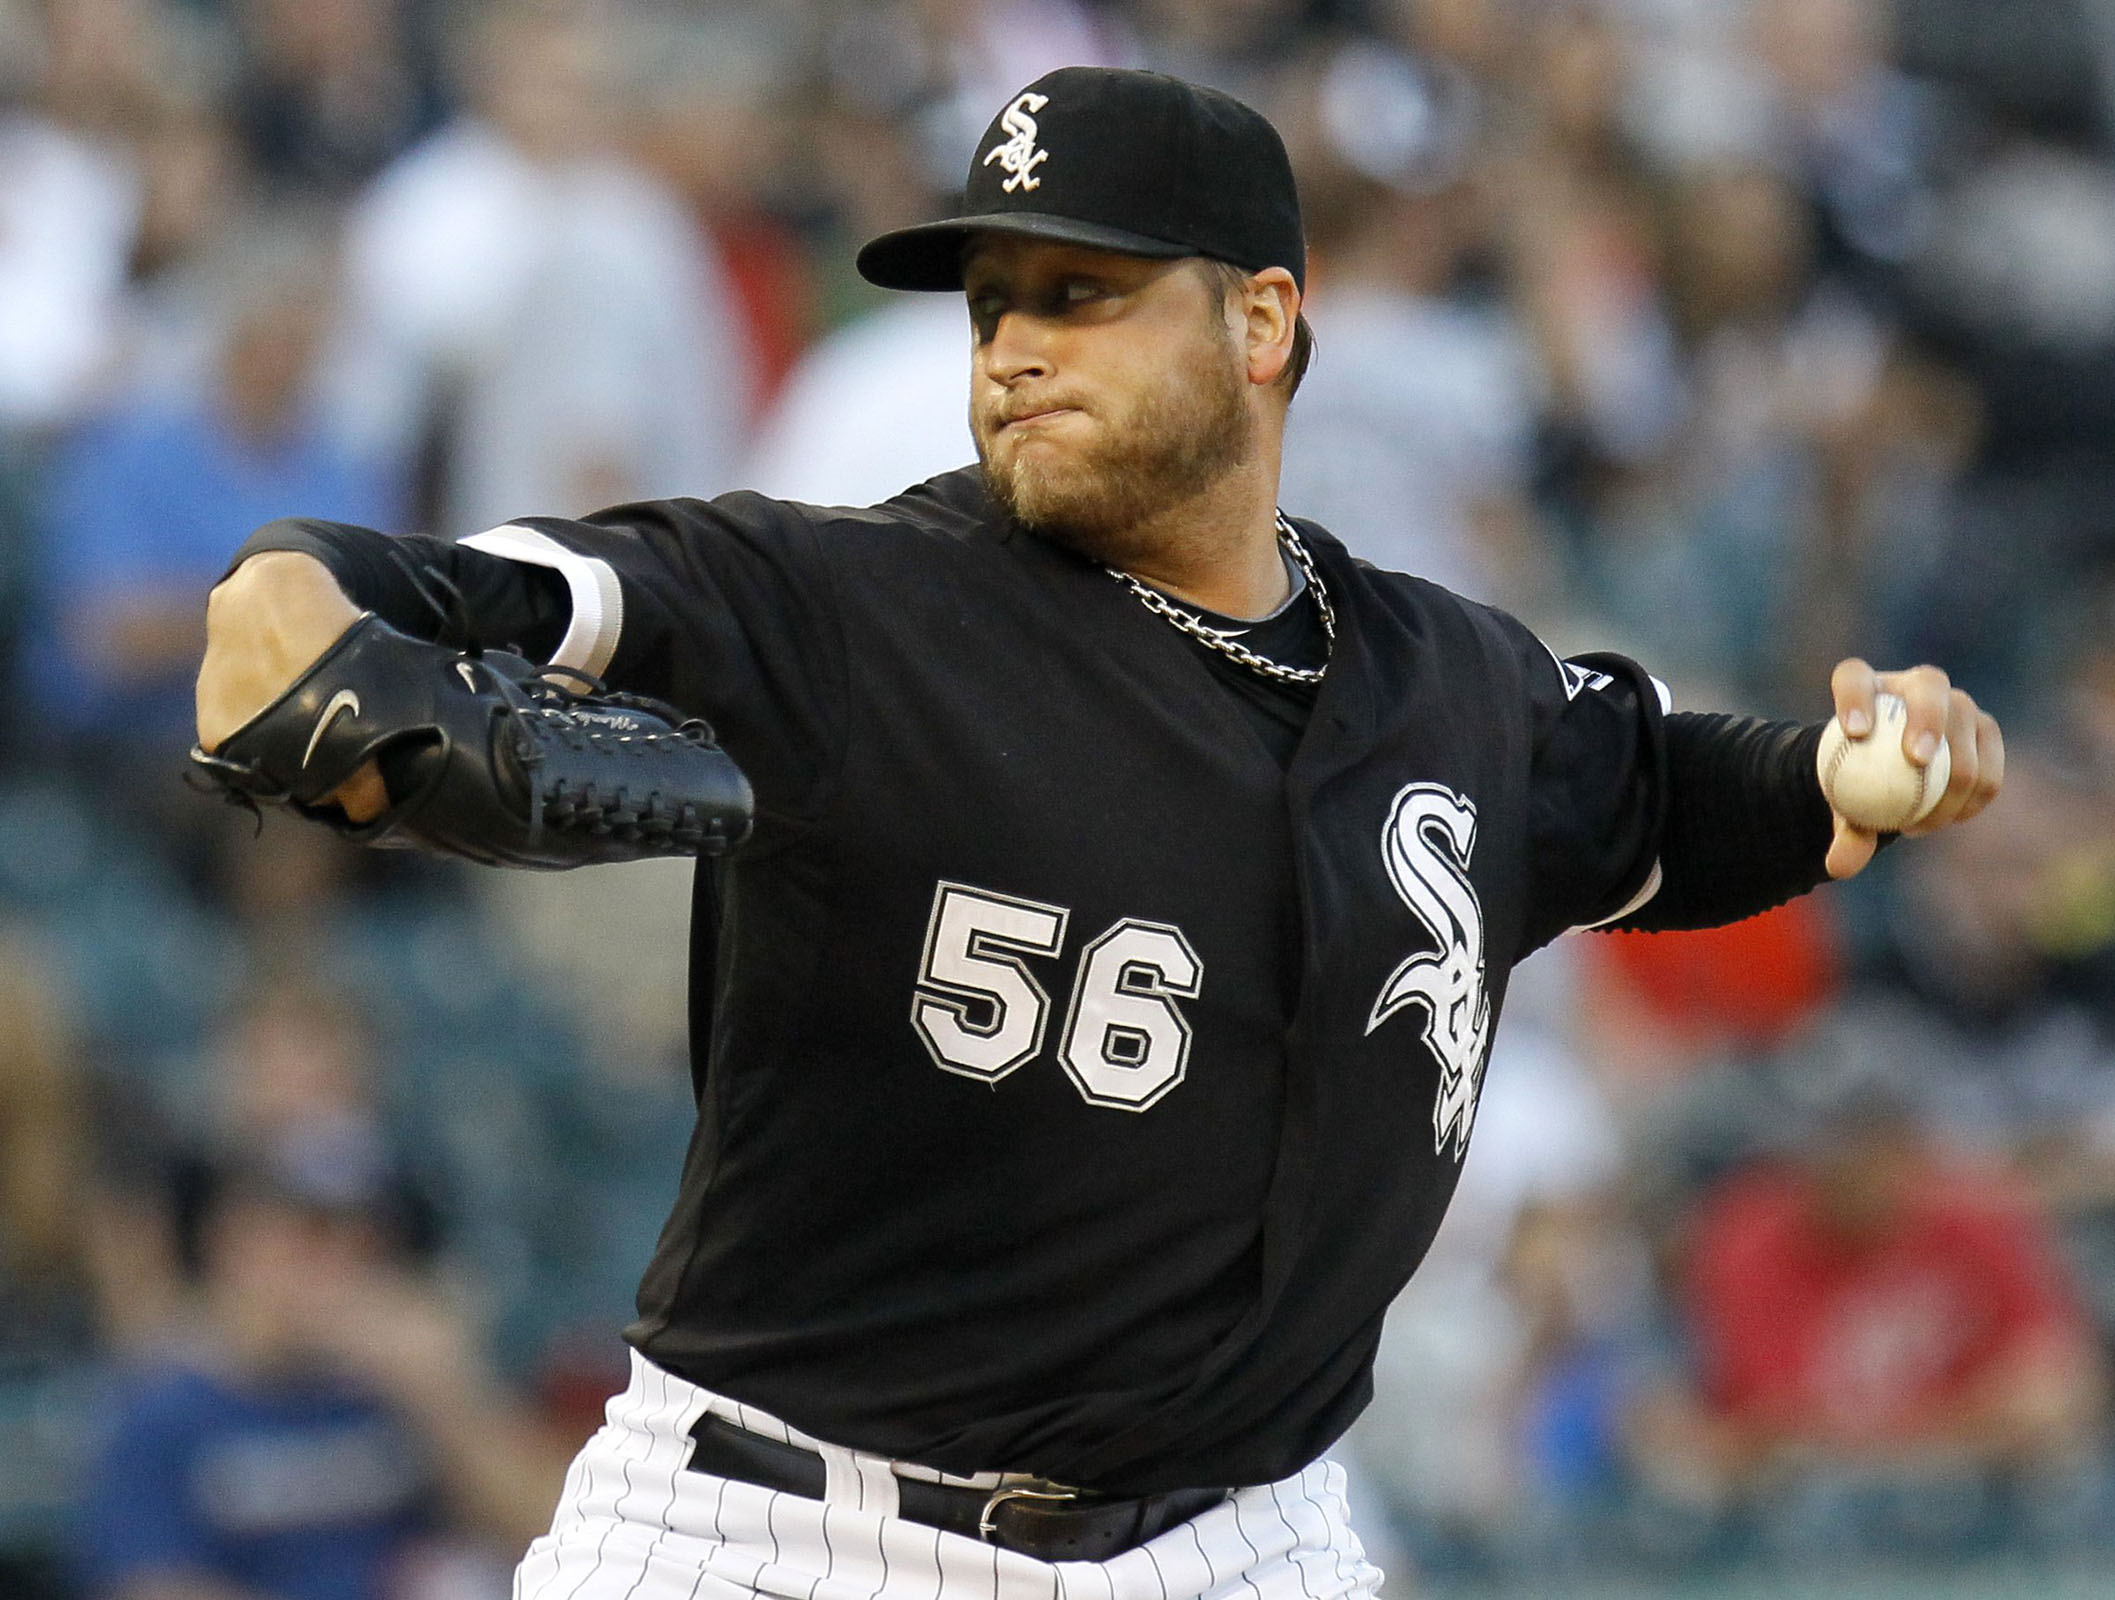 Buehrle throws 18th perfect game in MLB history